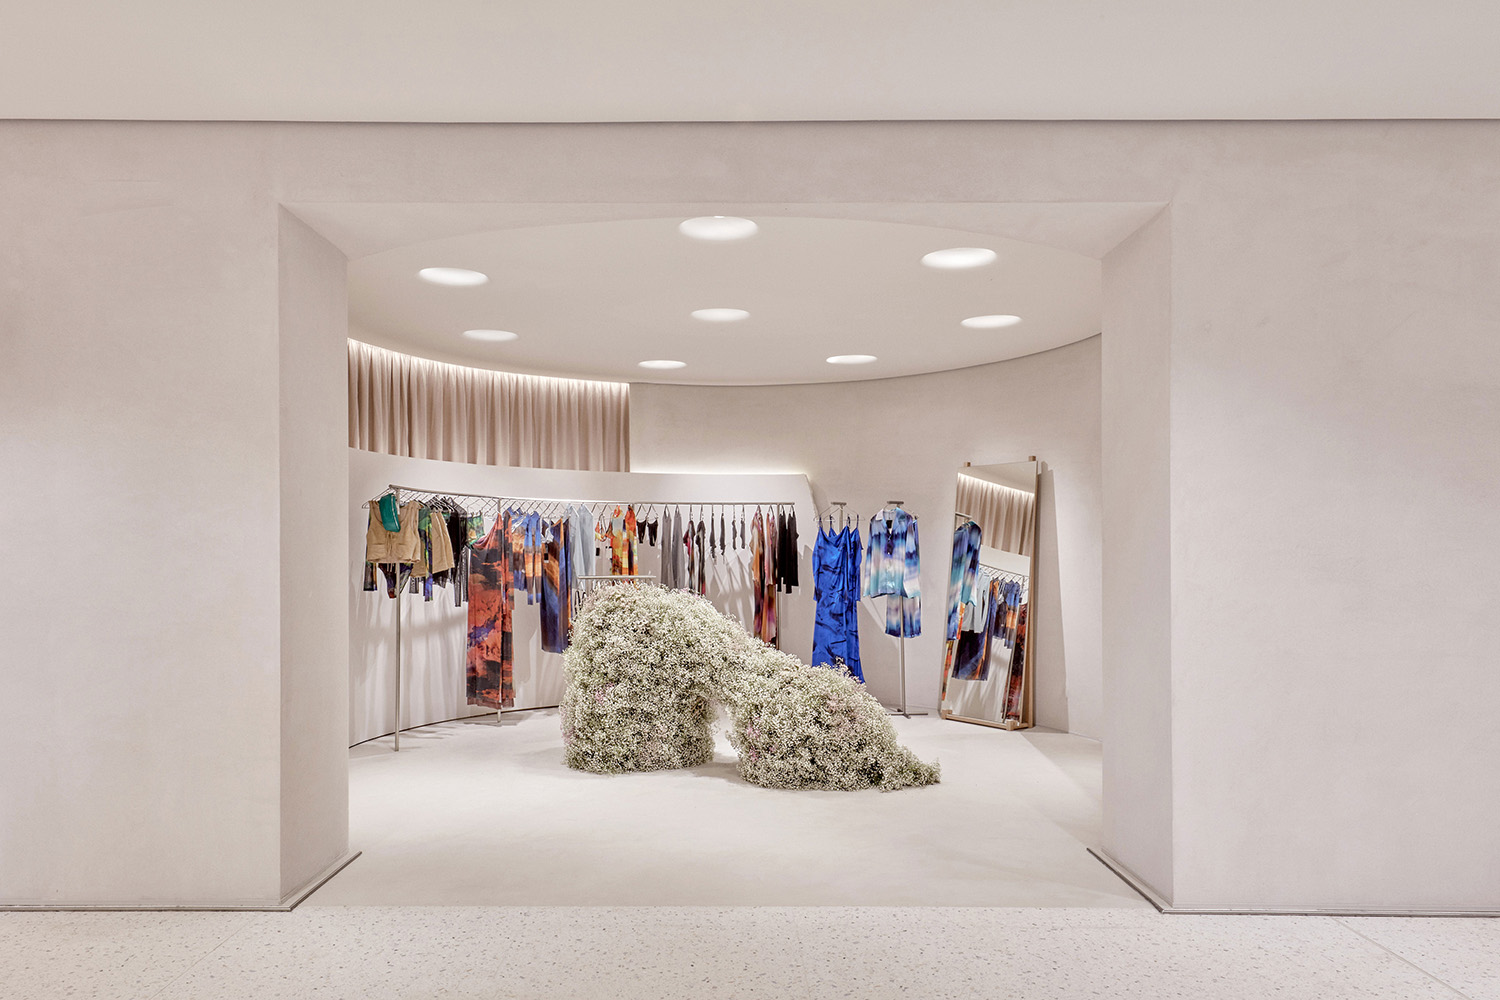 Portugal's first Zara reopens after extensive expansion and remodeling ...